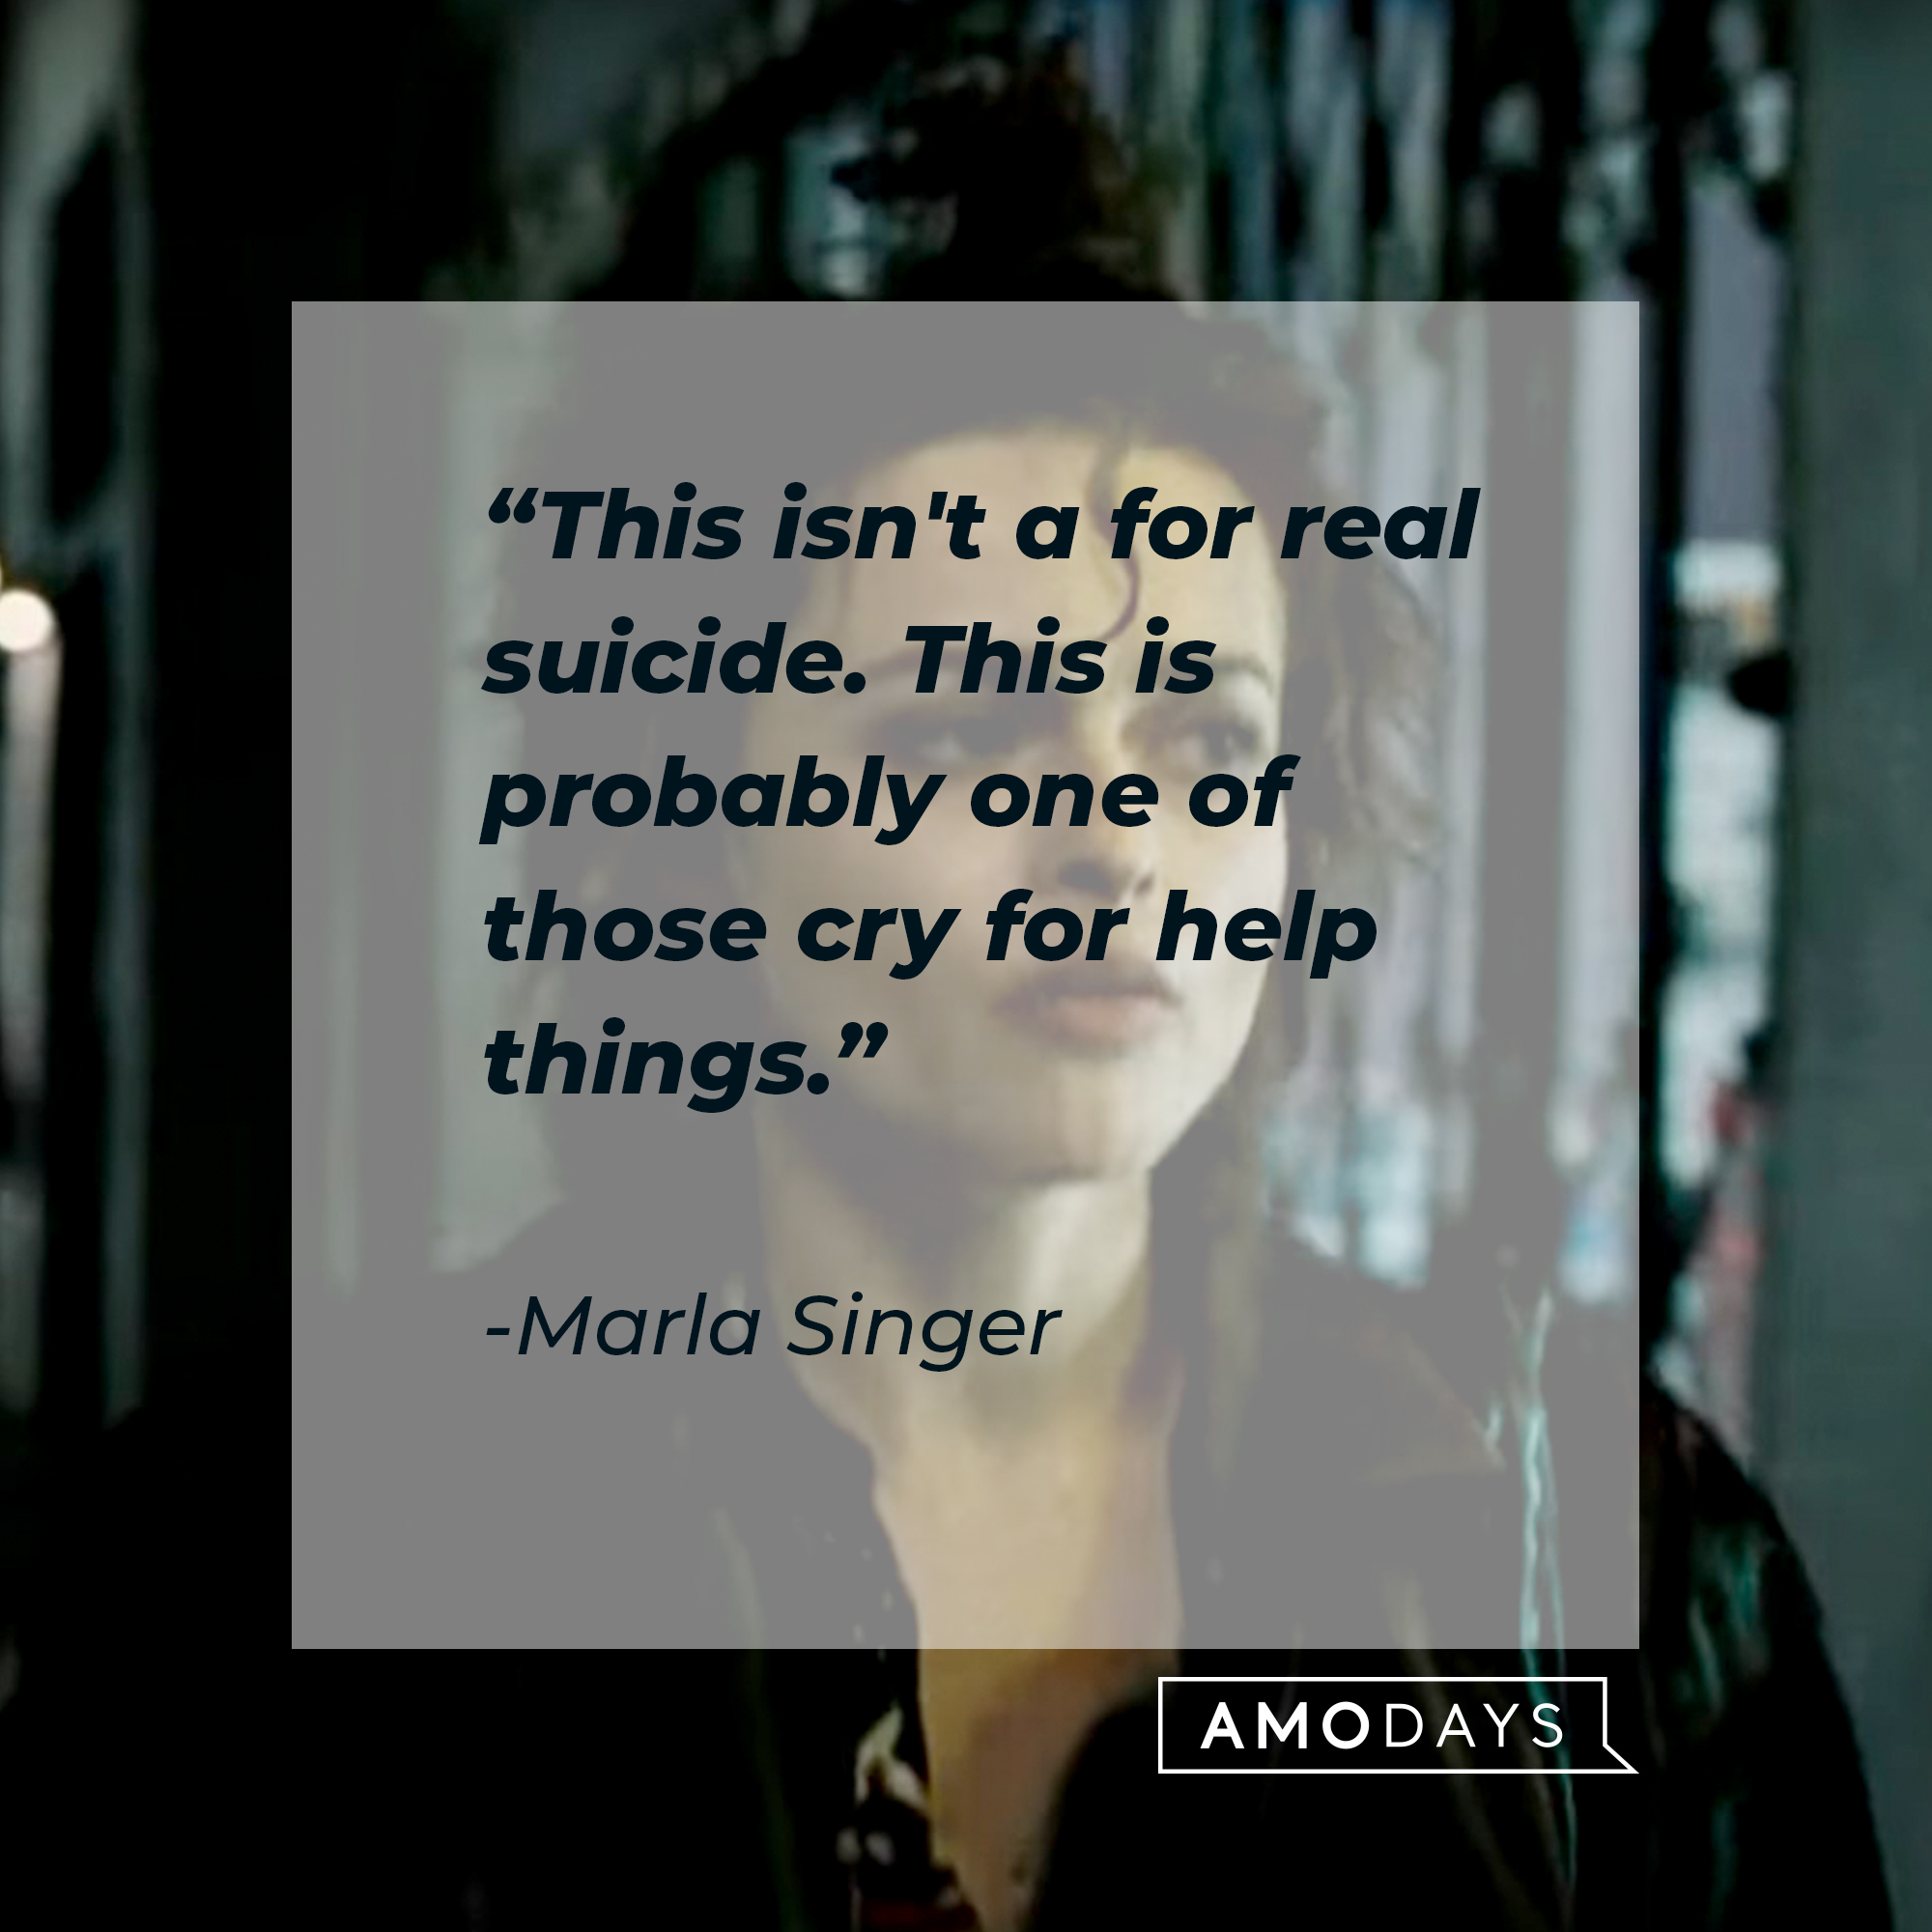 An image of Marla Singer with her quote: “This isn't a for real suicide. This is probably one of those cry for help things.” | Image: facebook.com/FightClub